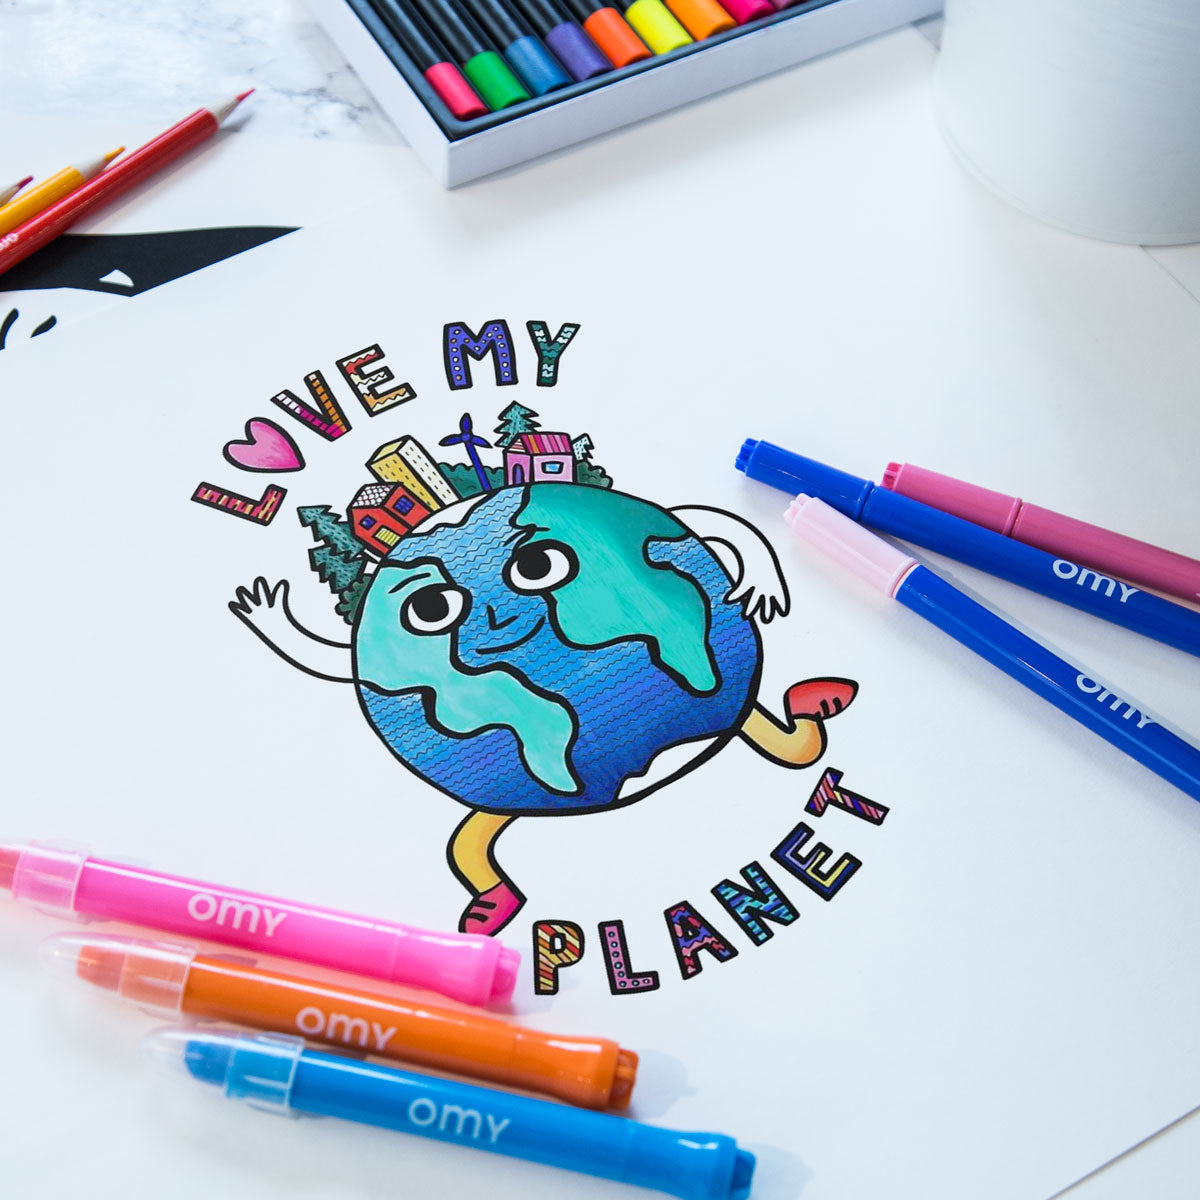 LOVE MY PLANET - POSTER